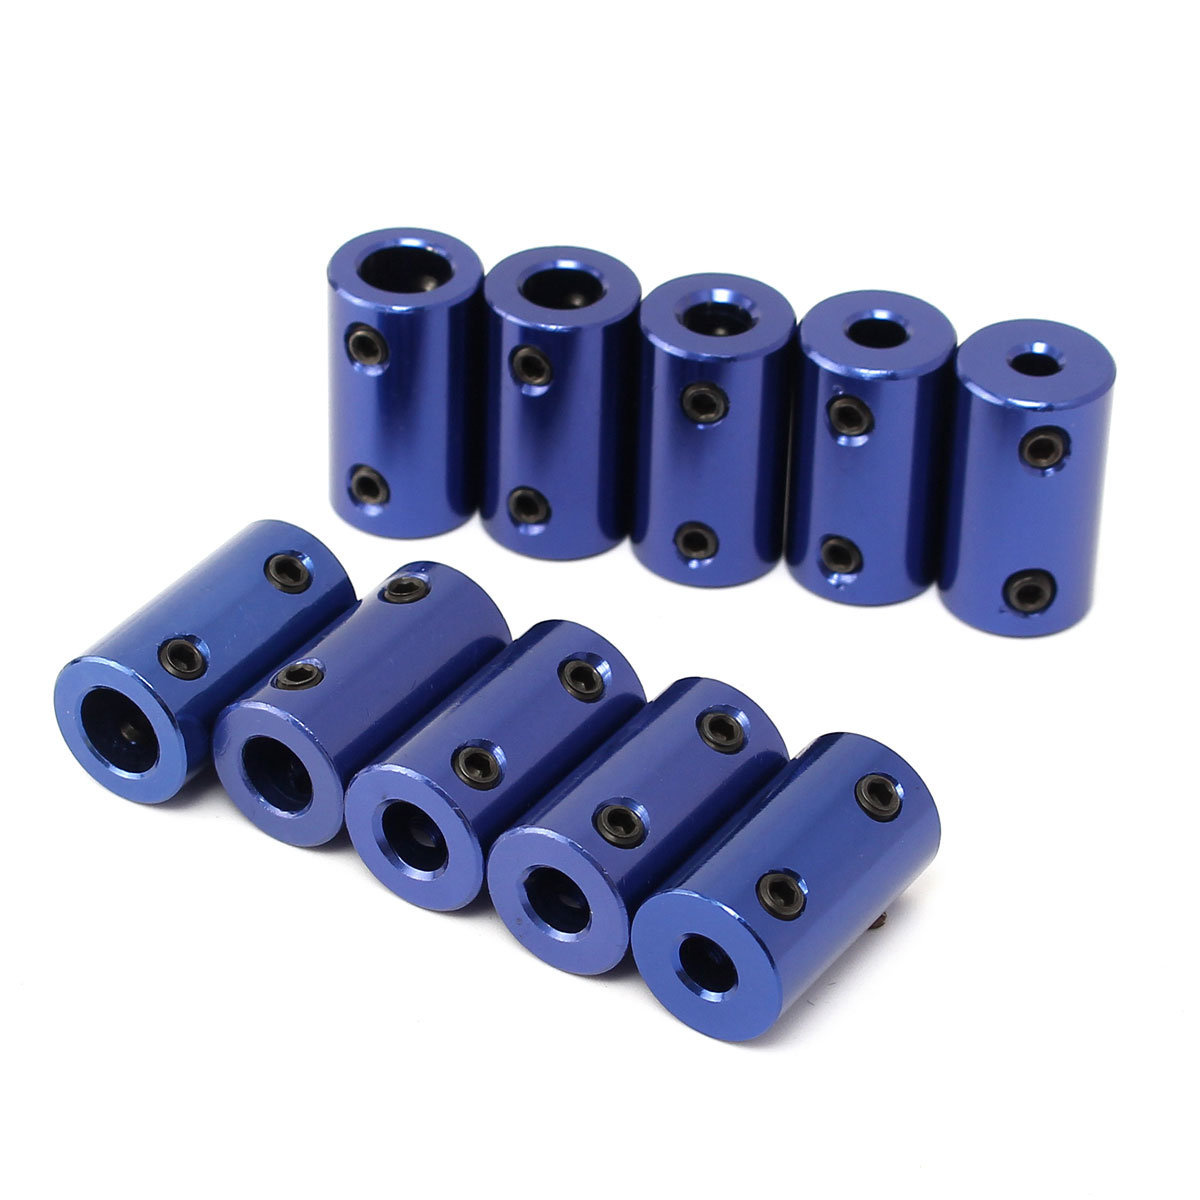 

10pcs 4/5/6/7/8mm Shaft Coupling Rigid Coupling Coupler Motor Connector With Spanner